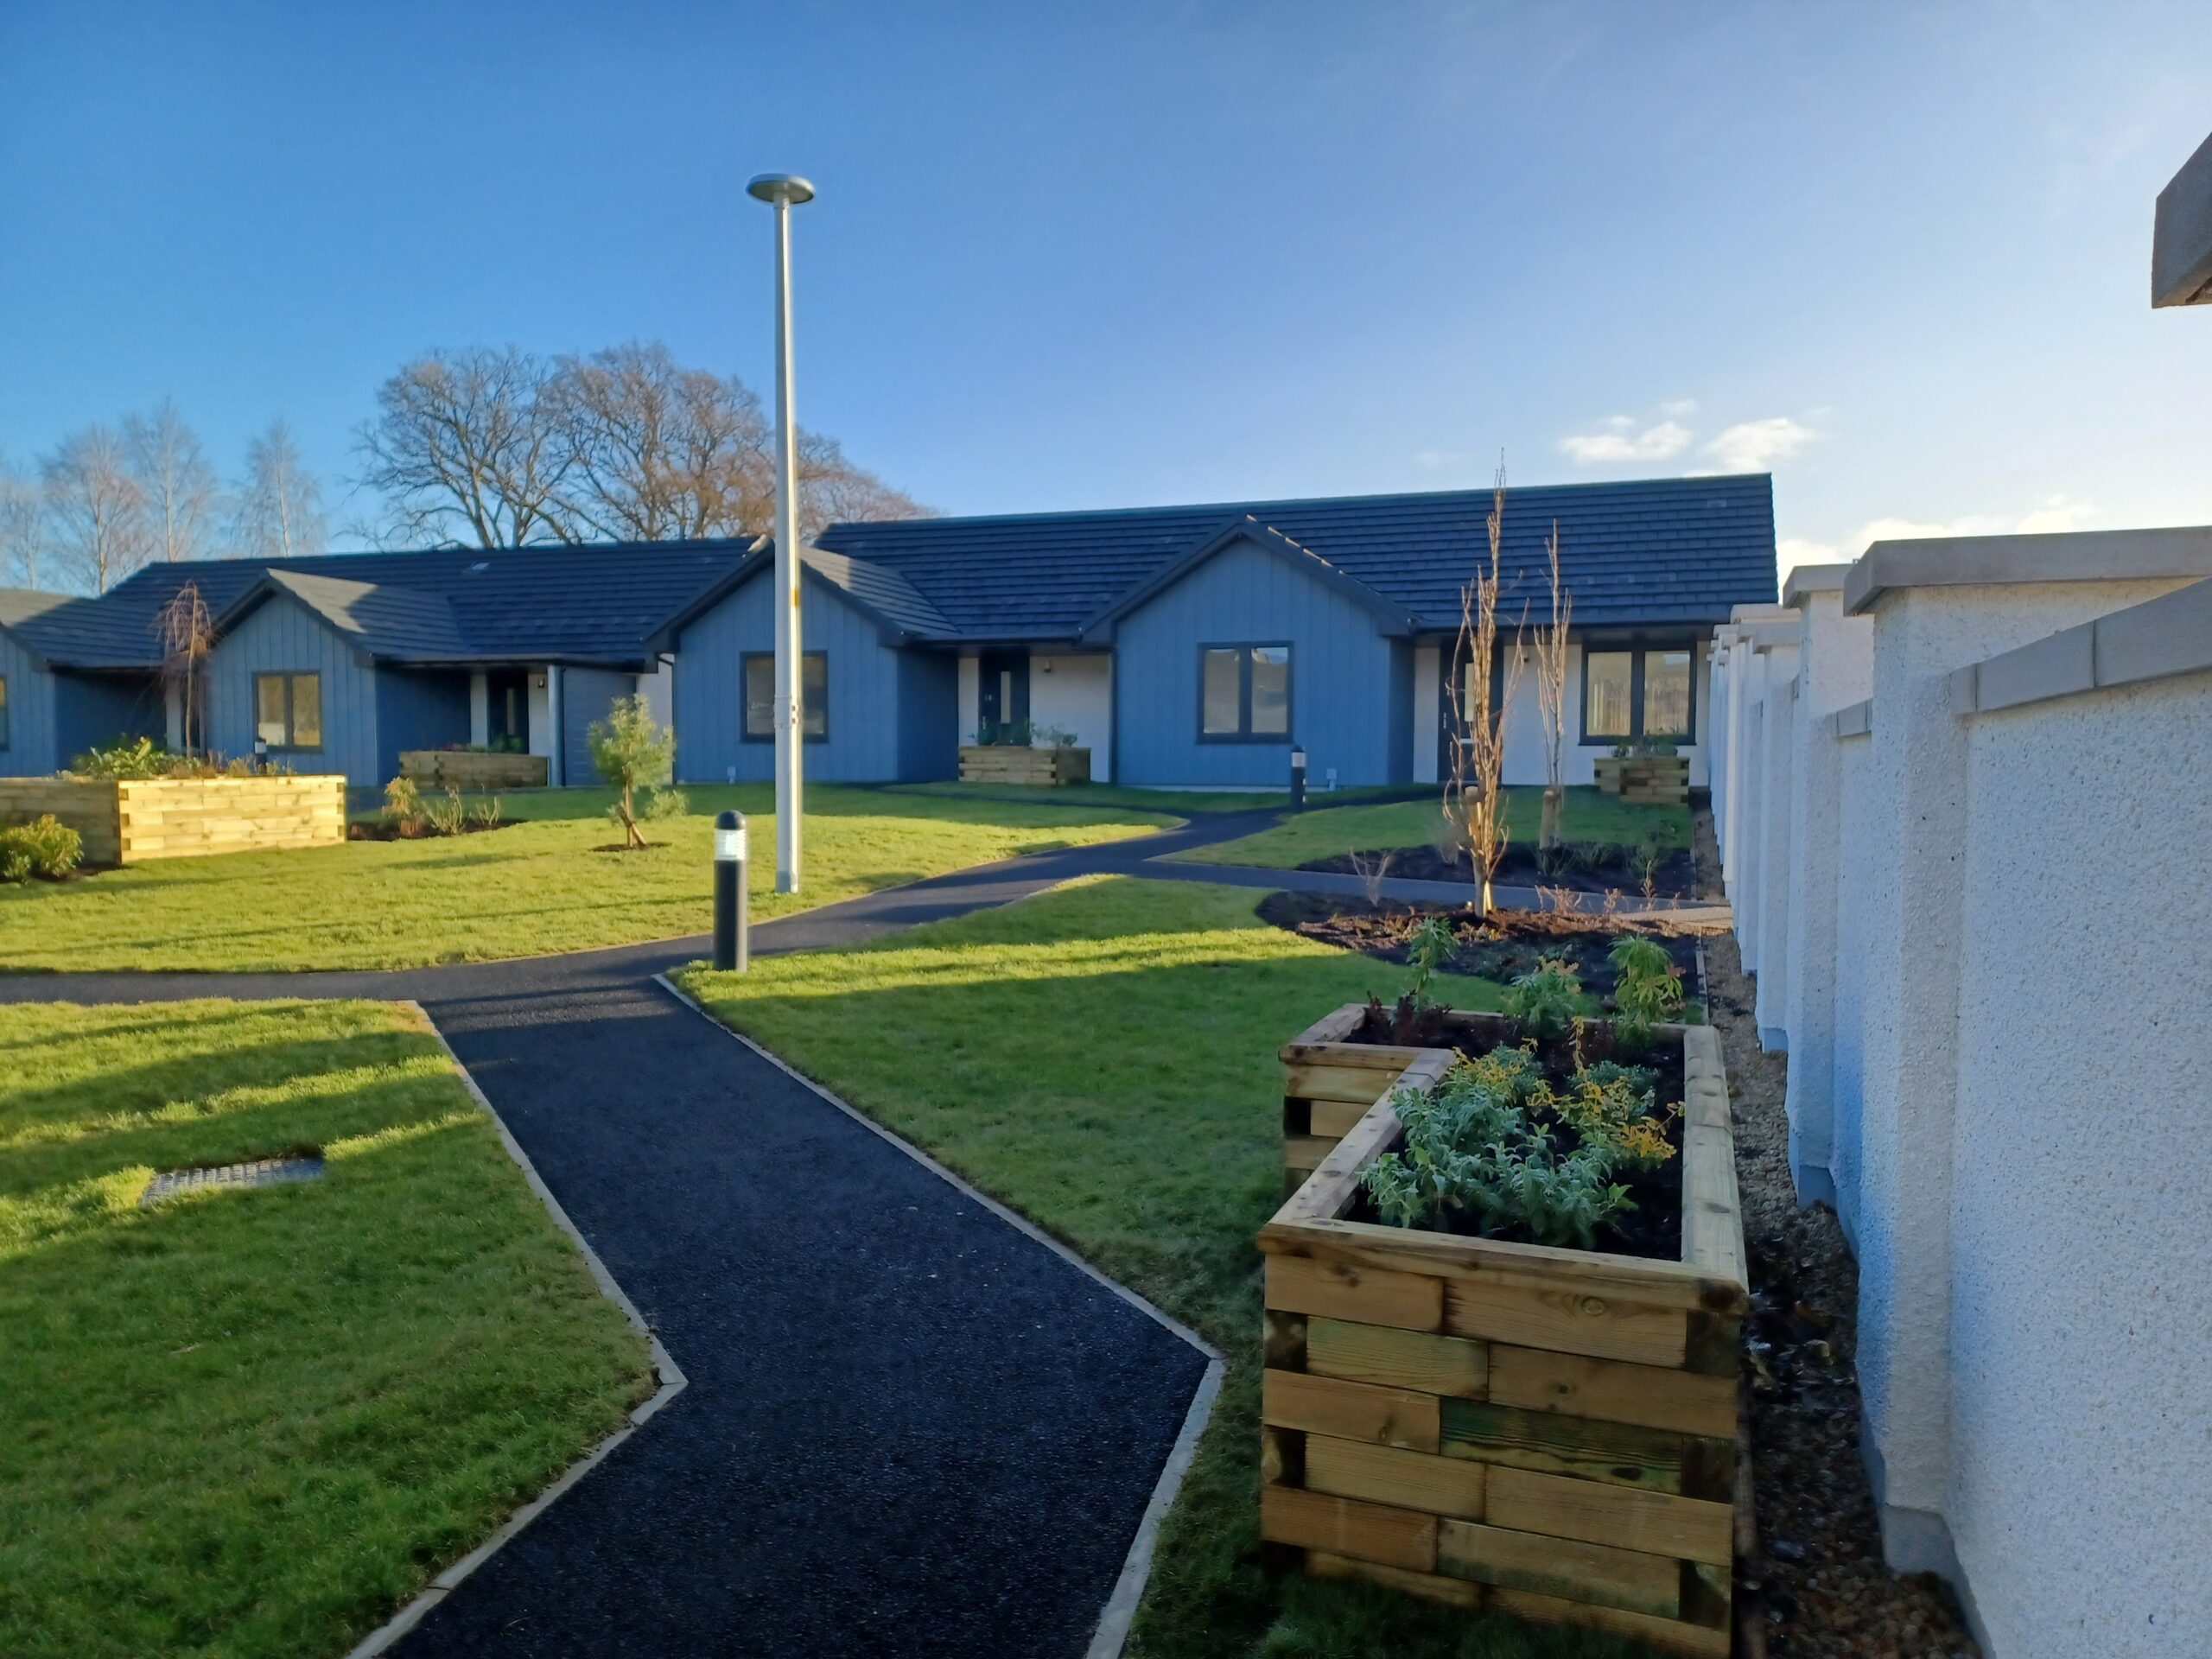 Albyn's new 'Fit Homes' for armed forces veterans at Stratton Farm